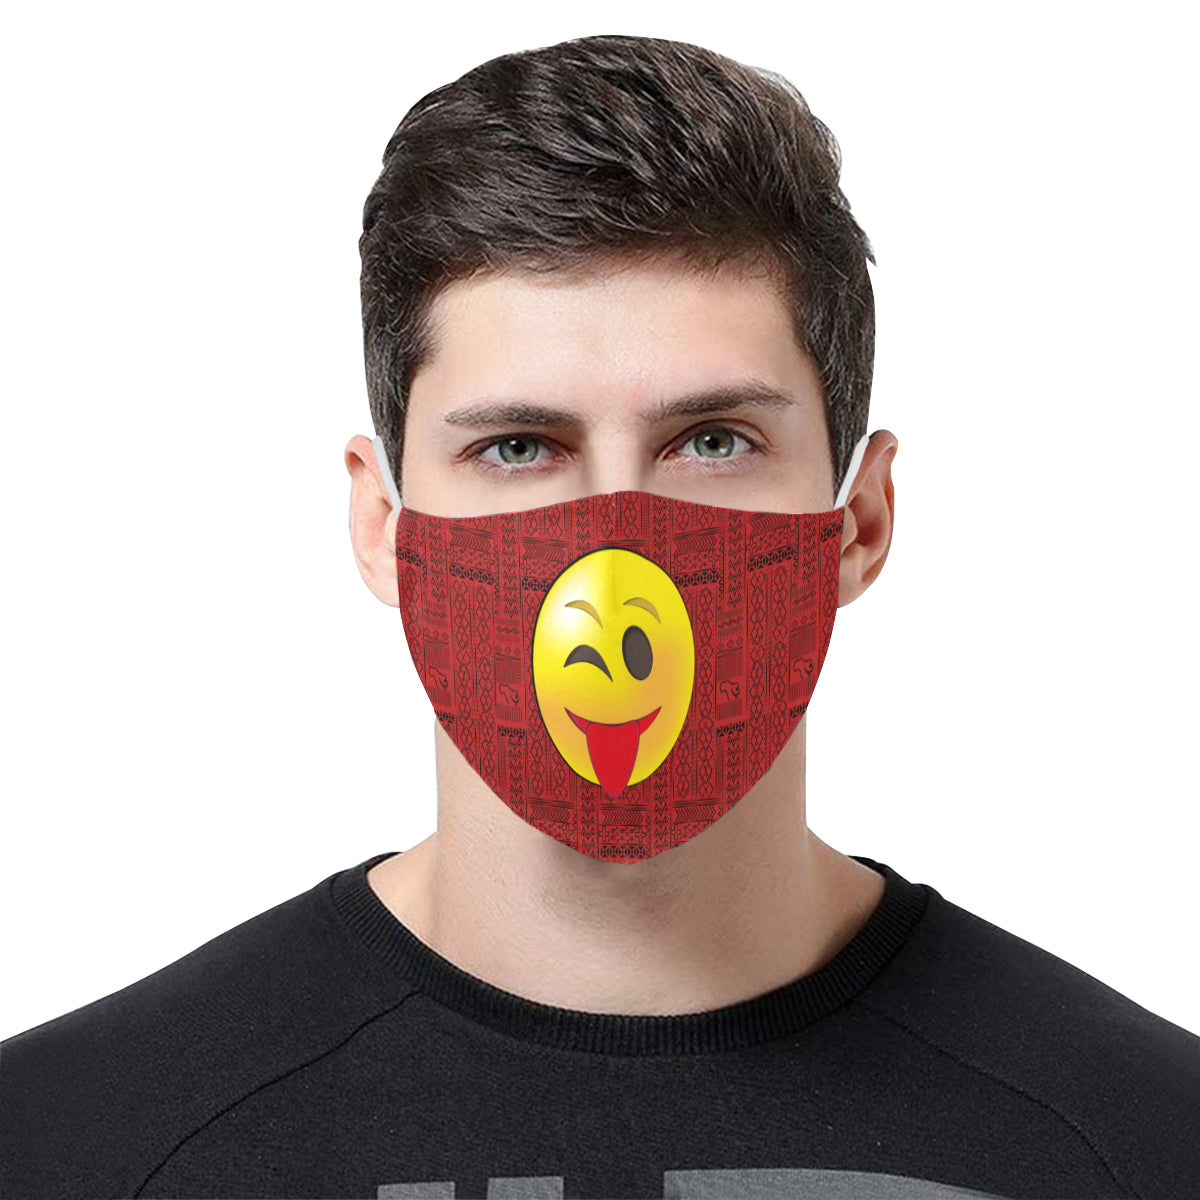 Cheeky Wink Tribal Print Emoji Cotton Fabric Face Mask with Filter Slot and Adjustable Strap - Non-medical use (2 Filters Included)